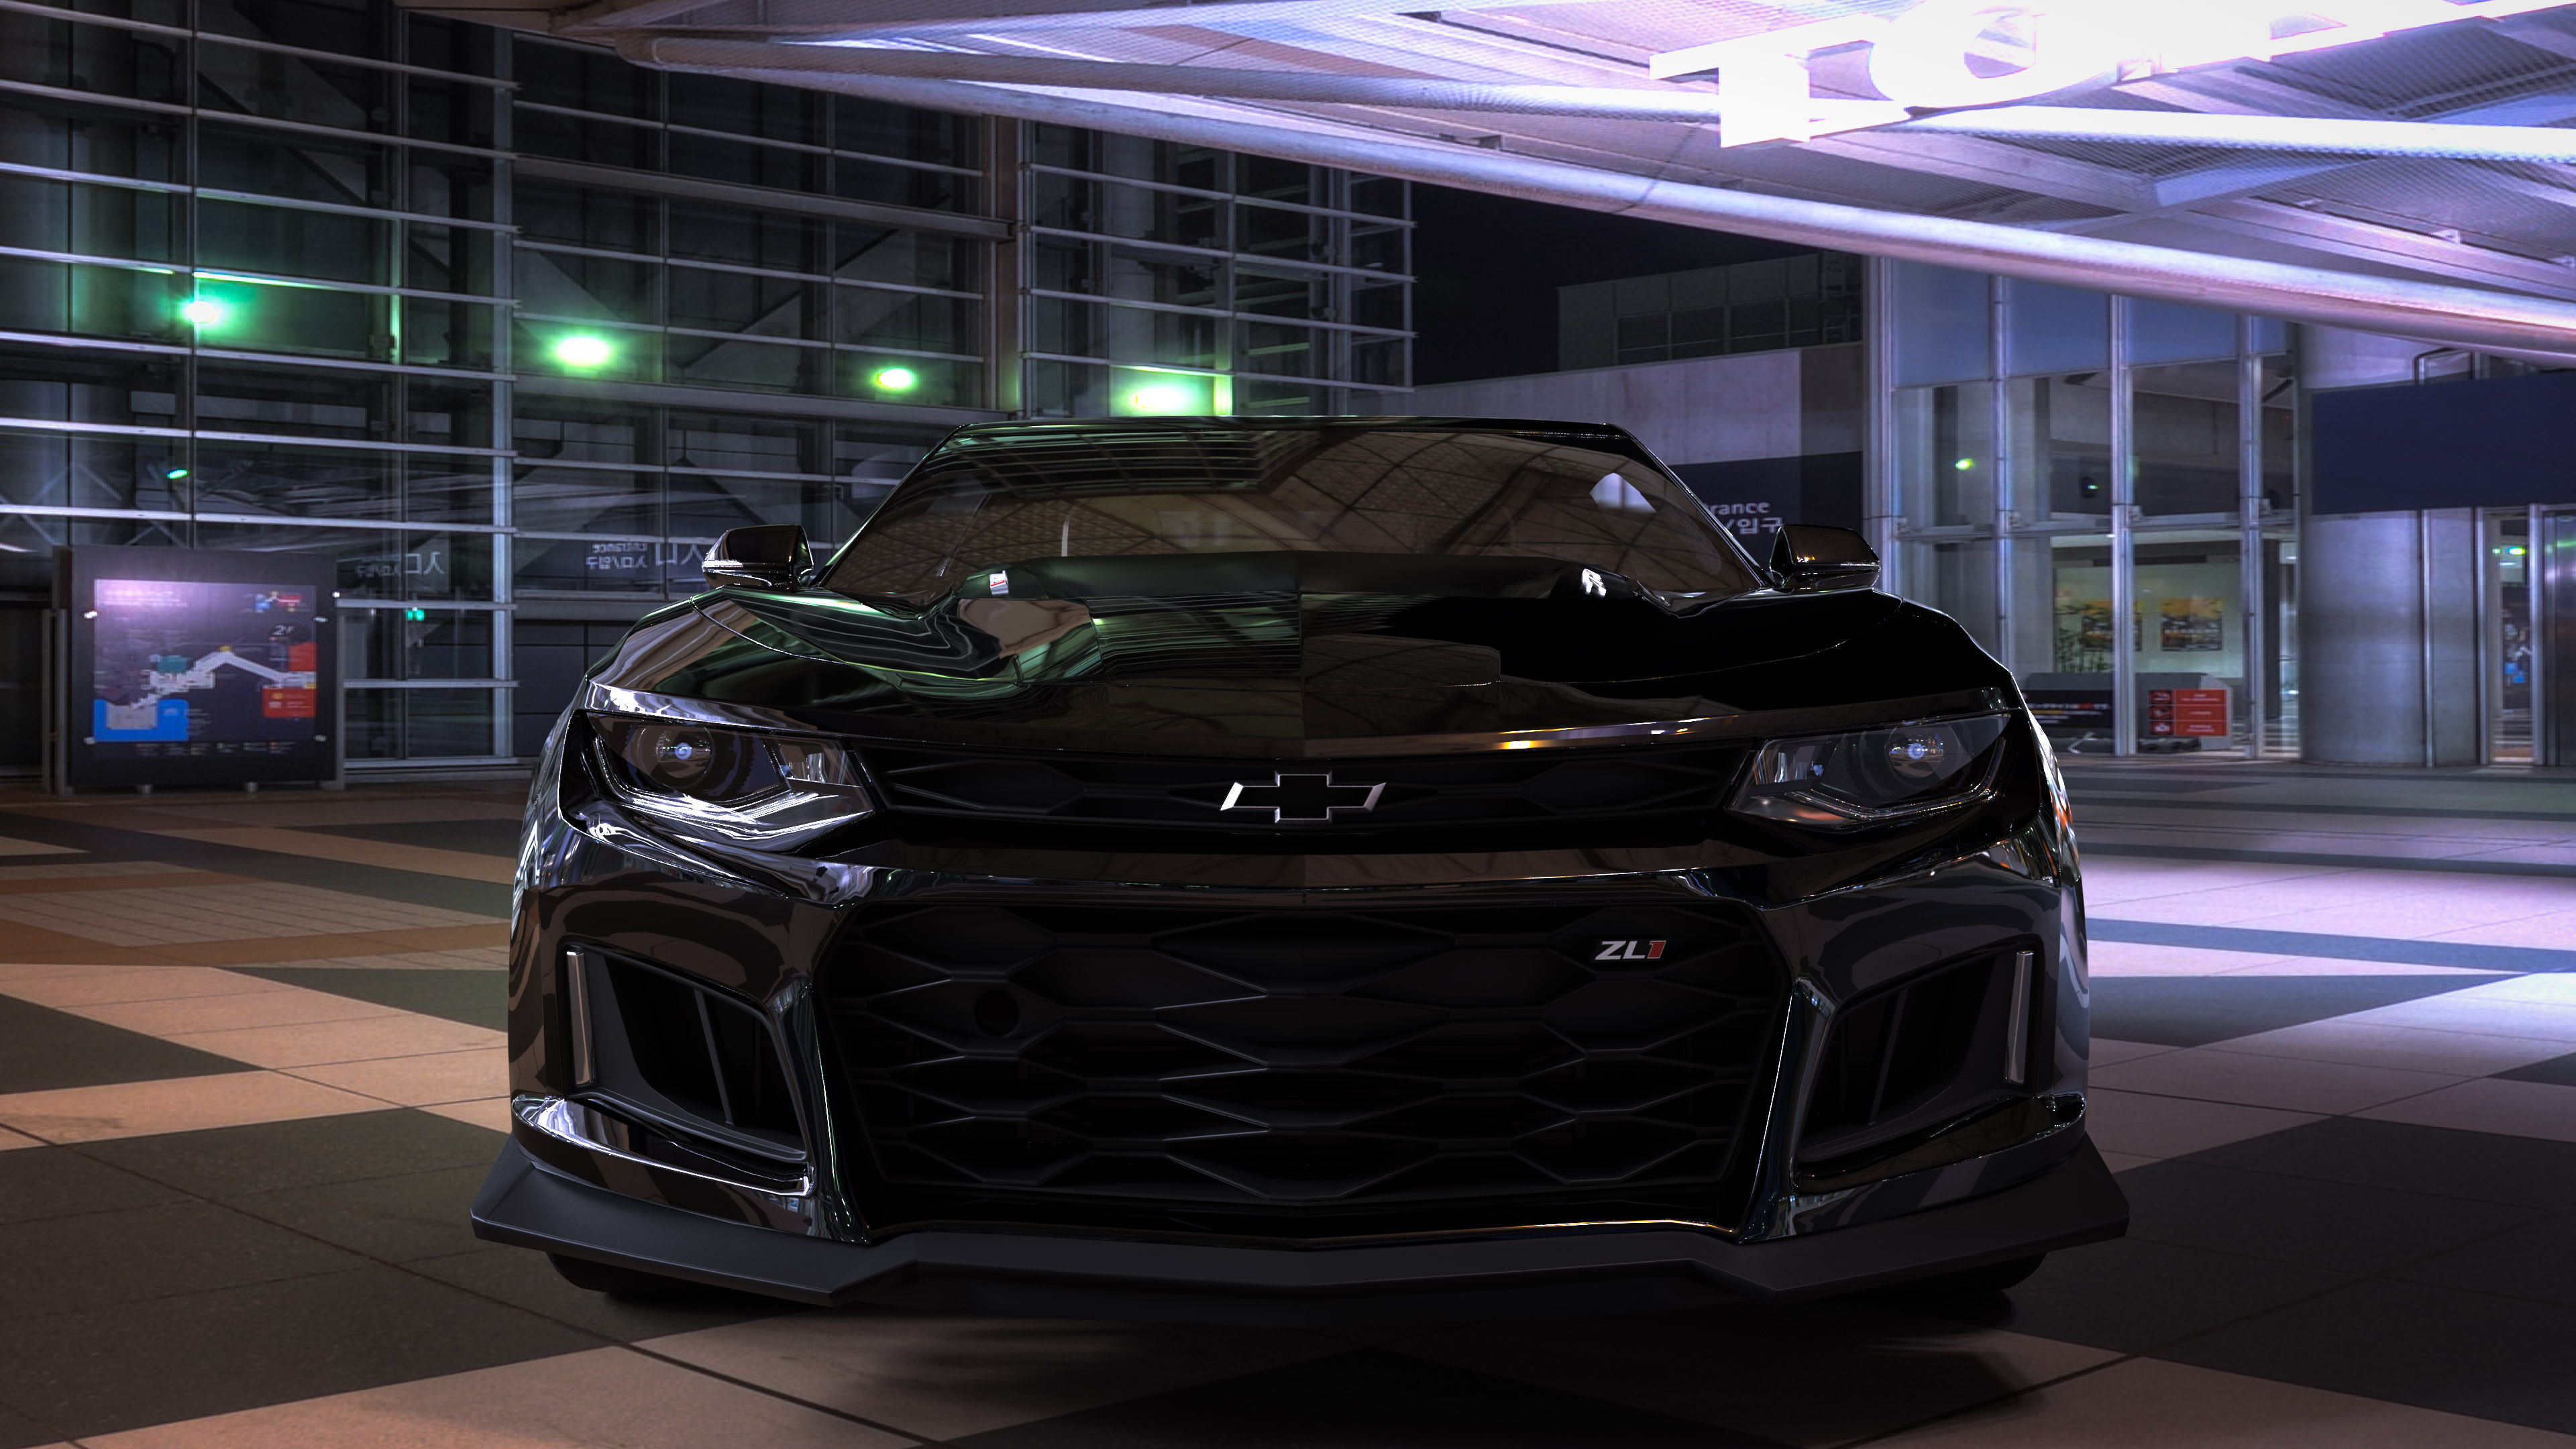 Revitalize your desktop with the striking wallpaper, showcasing the Chevrolet Camaro muscle car, available for free and adding a touch of power to your screens.